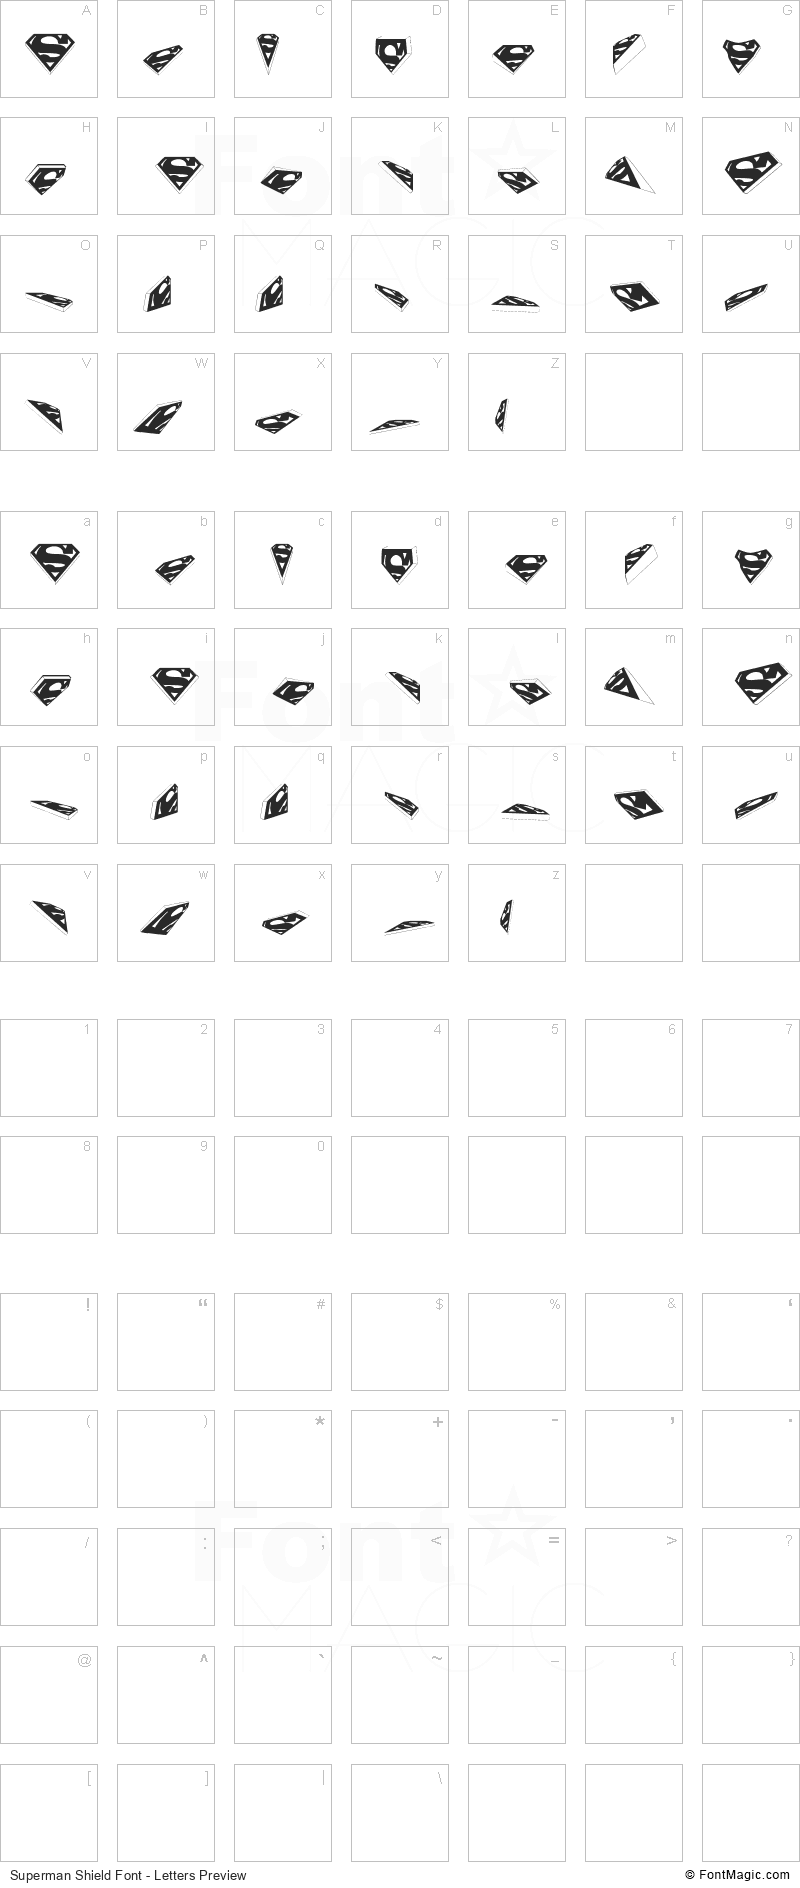 Superman Shield Font - All Latters Preview Chart